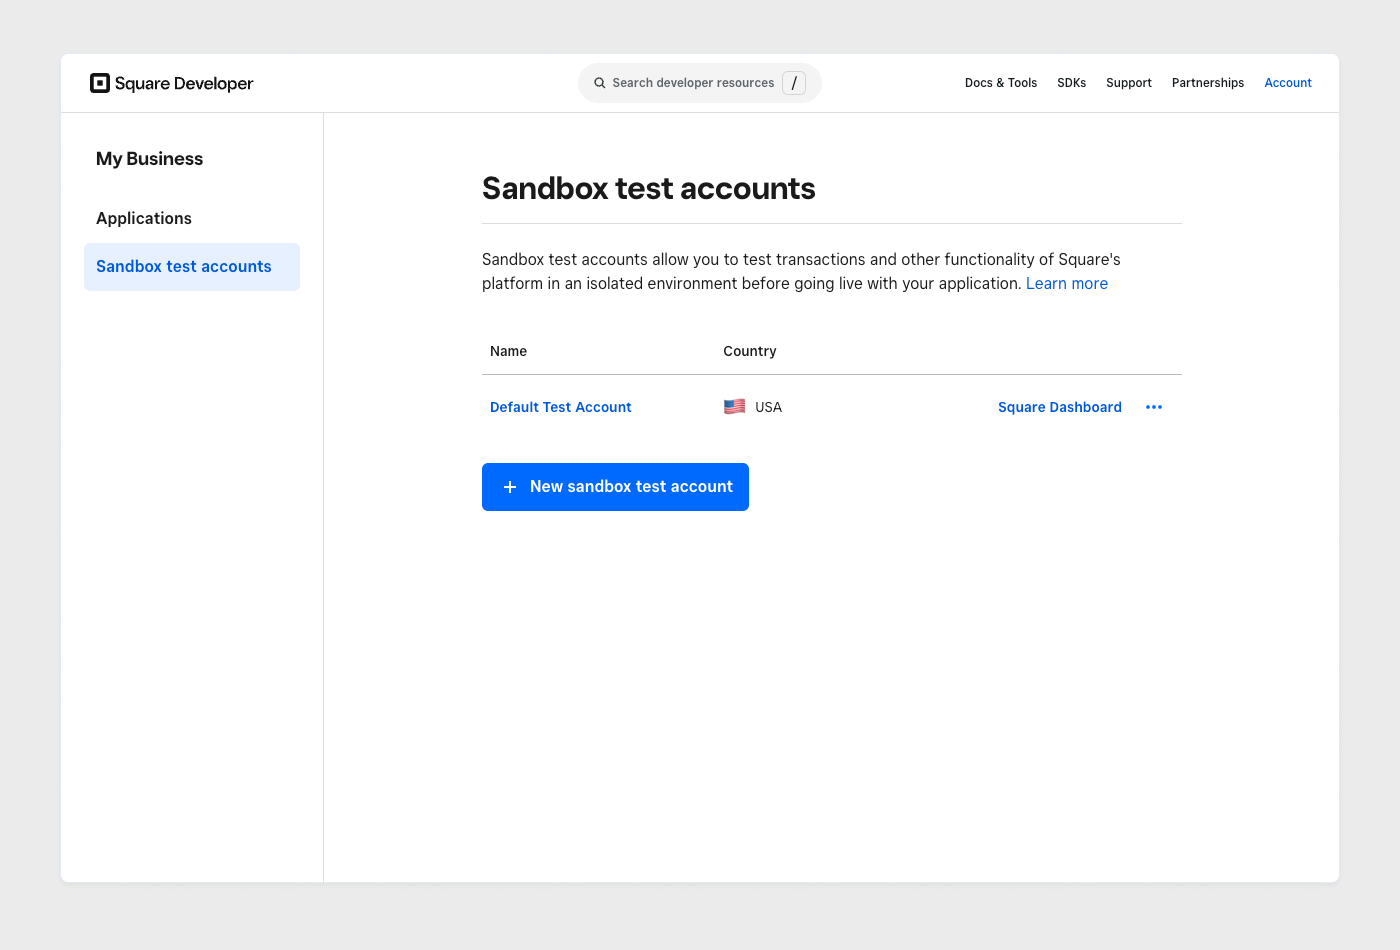 A screenshot of the Sandbox test accounts page in the Developer Dashboard.